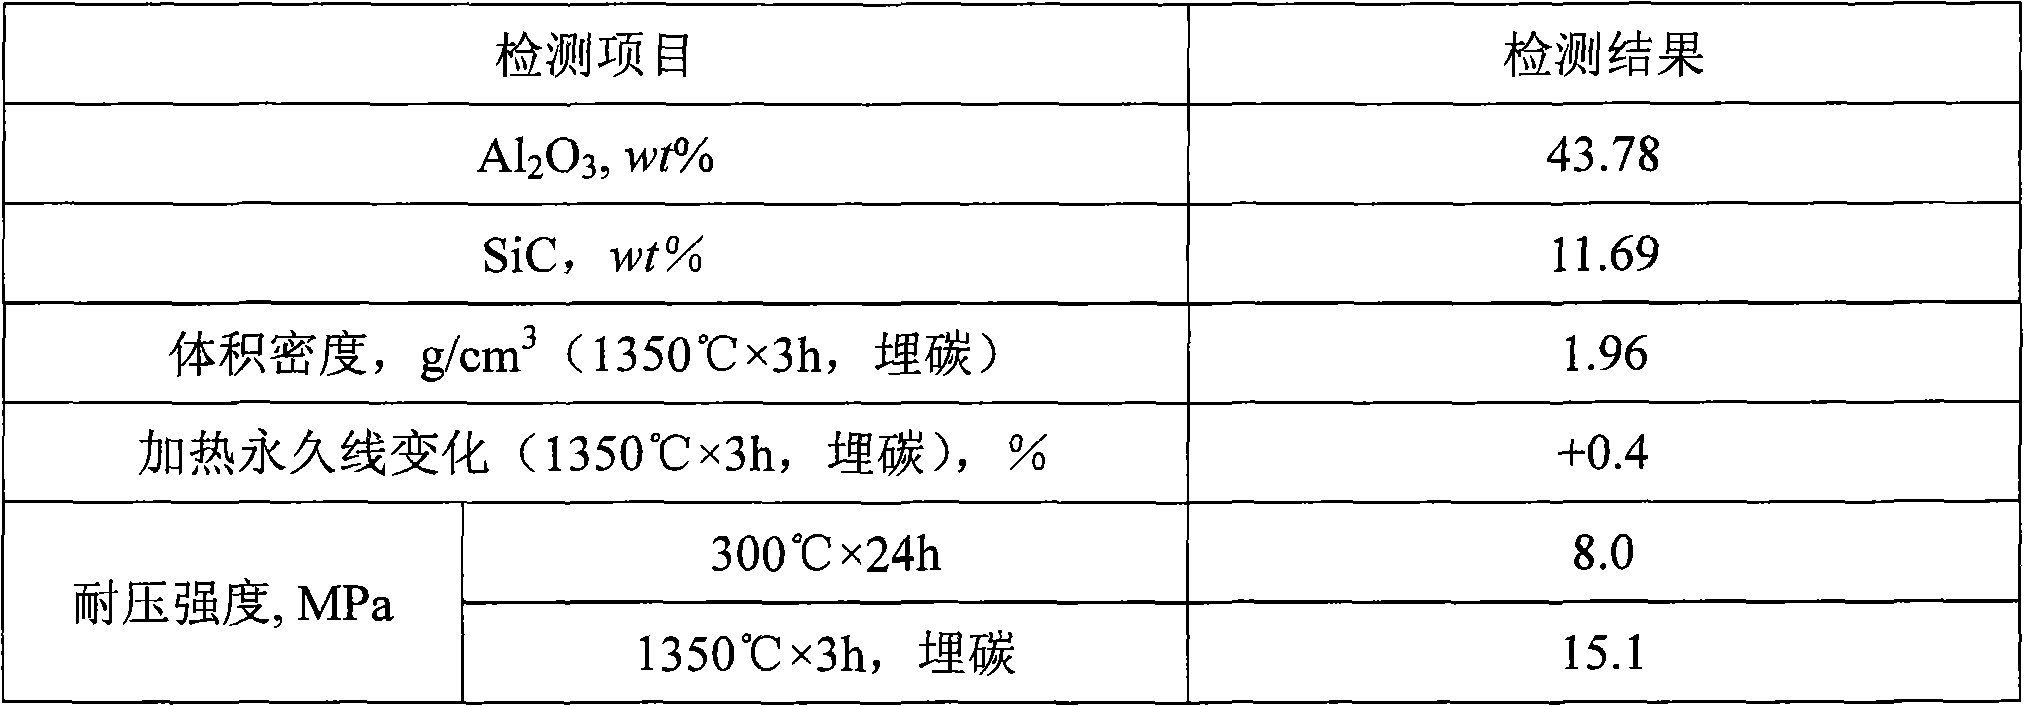 Method for producing waterless taphole mix for blast furnace from high-alumina waste refractory materials